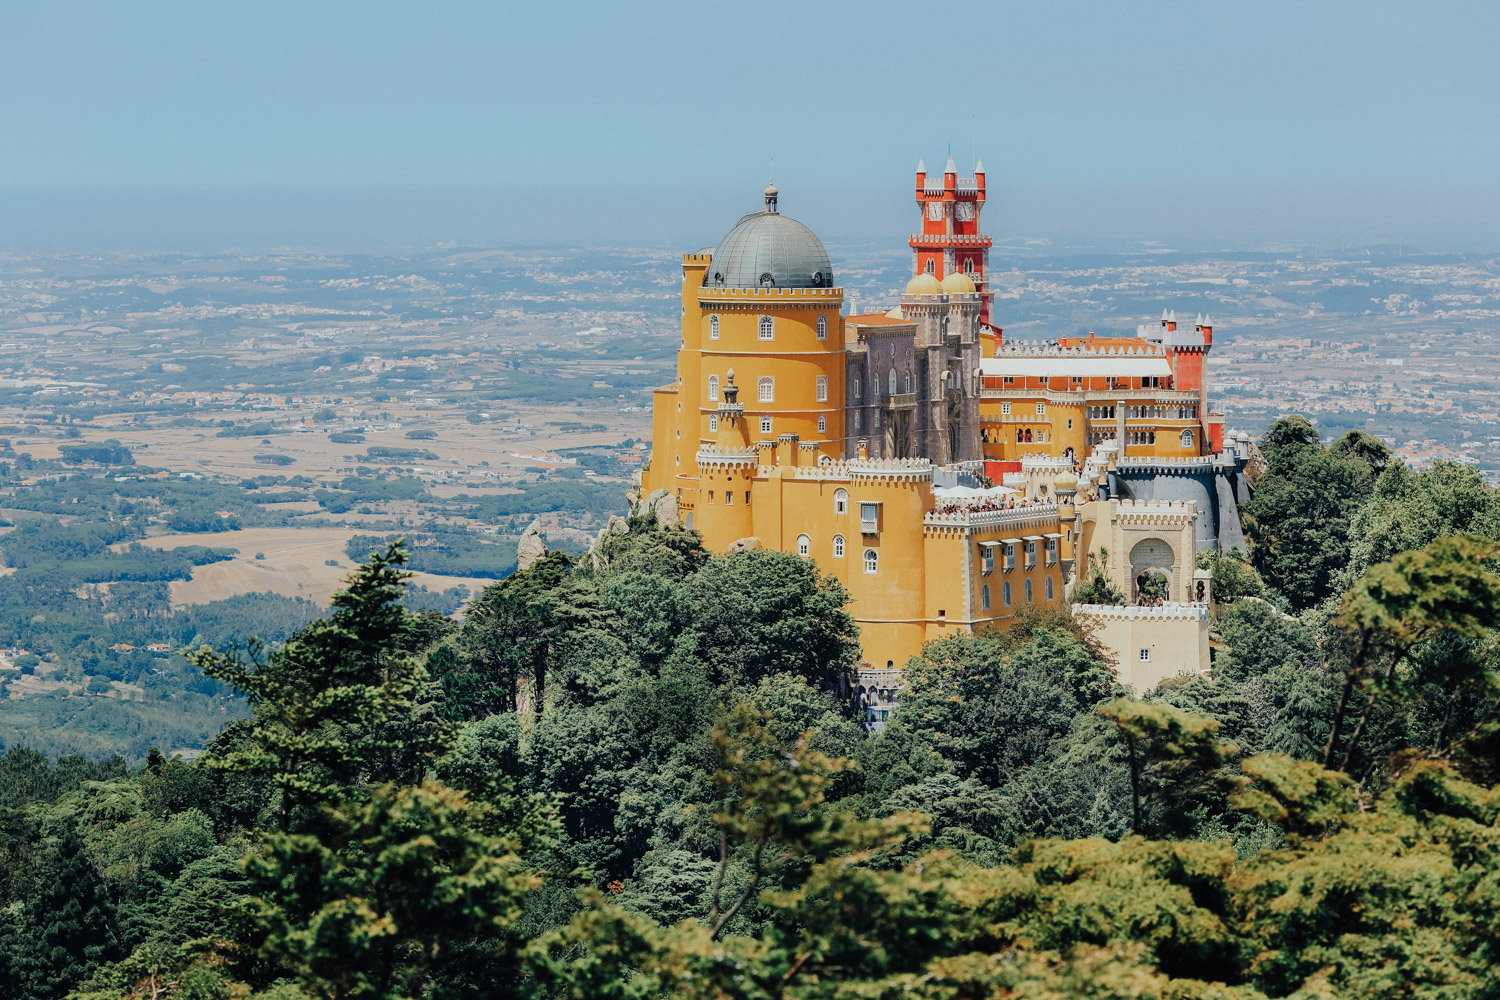 ADARAS Travel Guide to Sintra, Portugal - Pena Palace